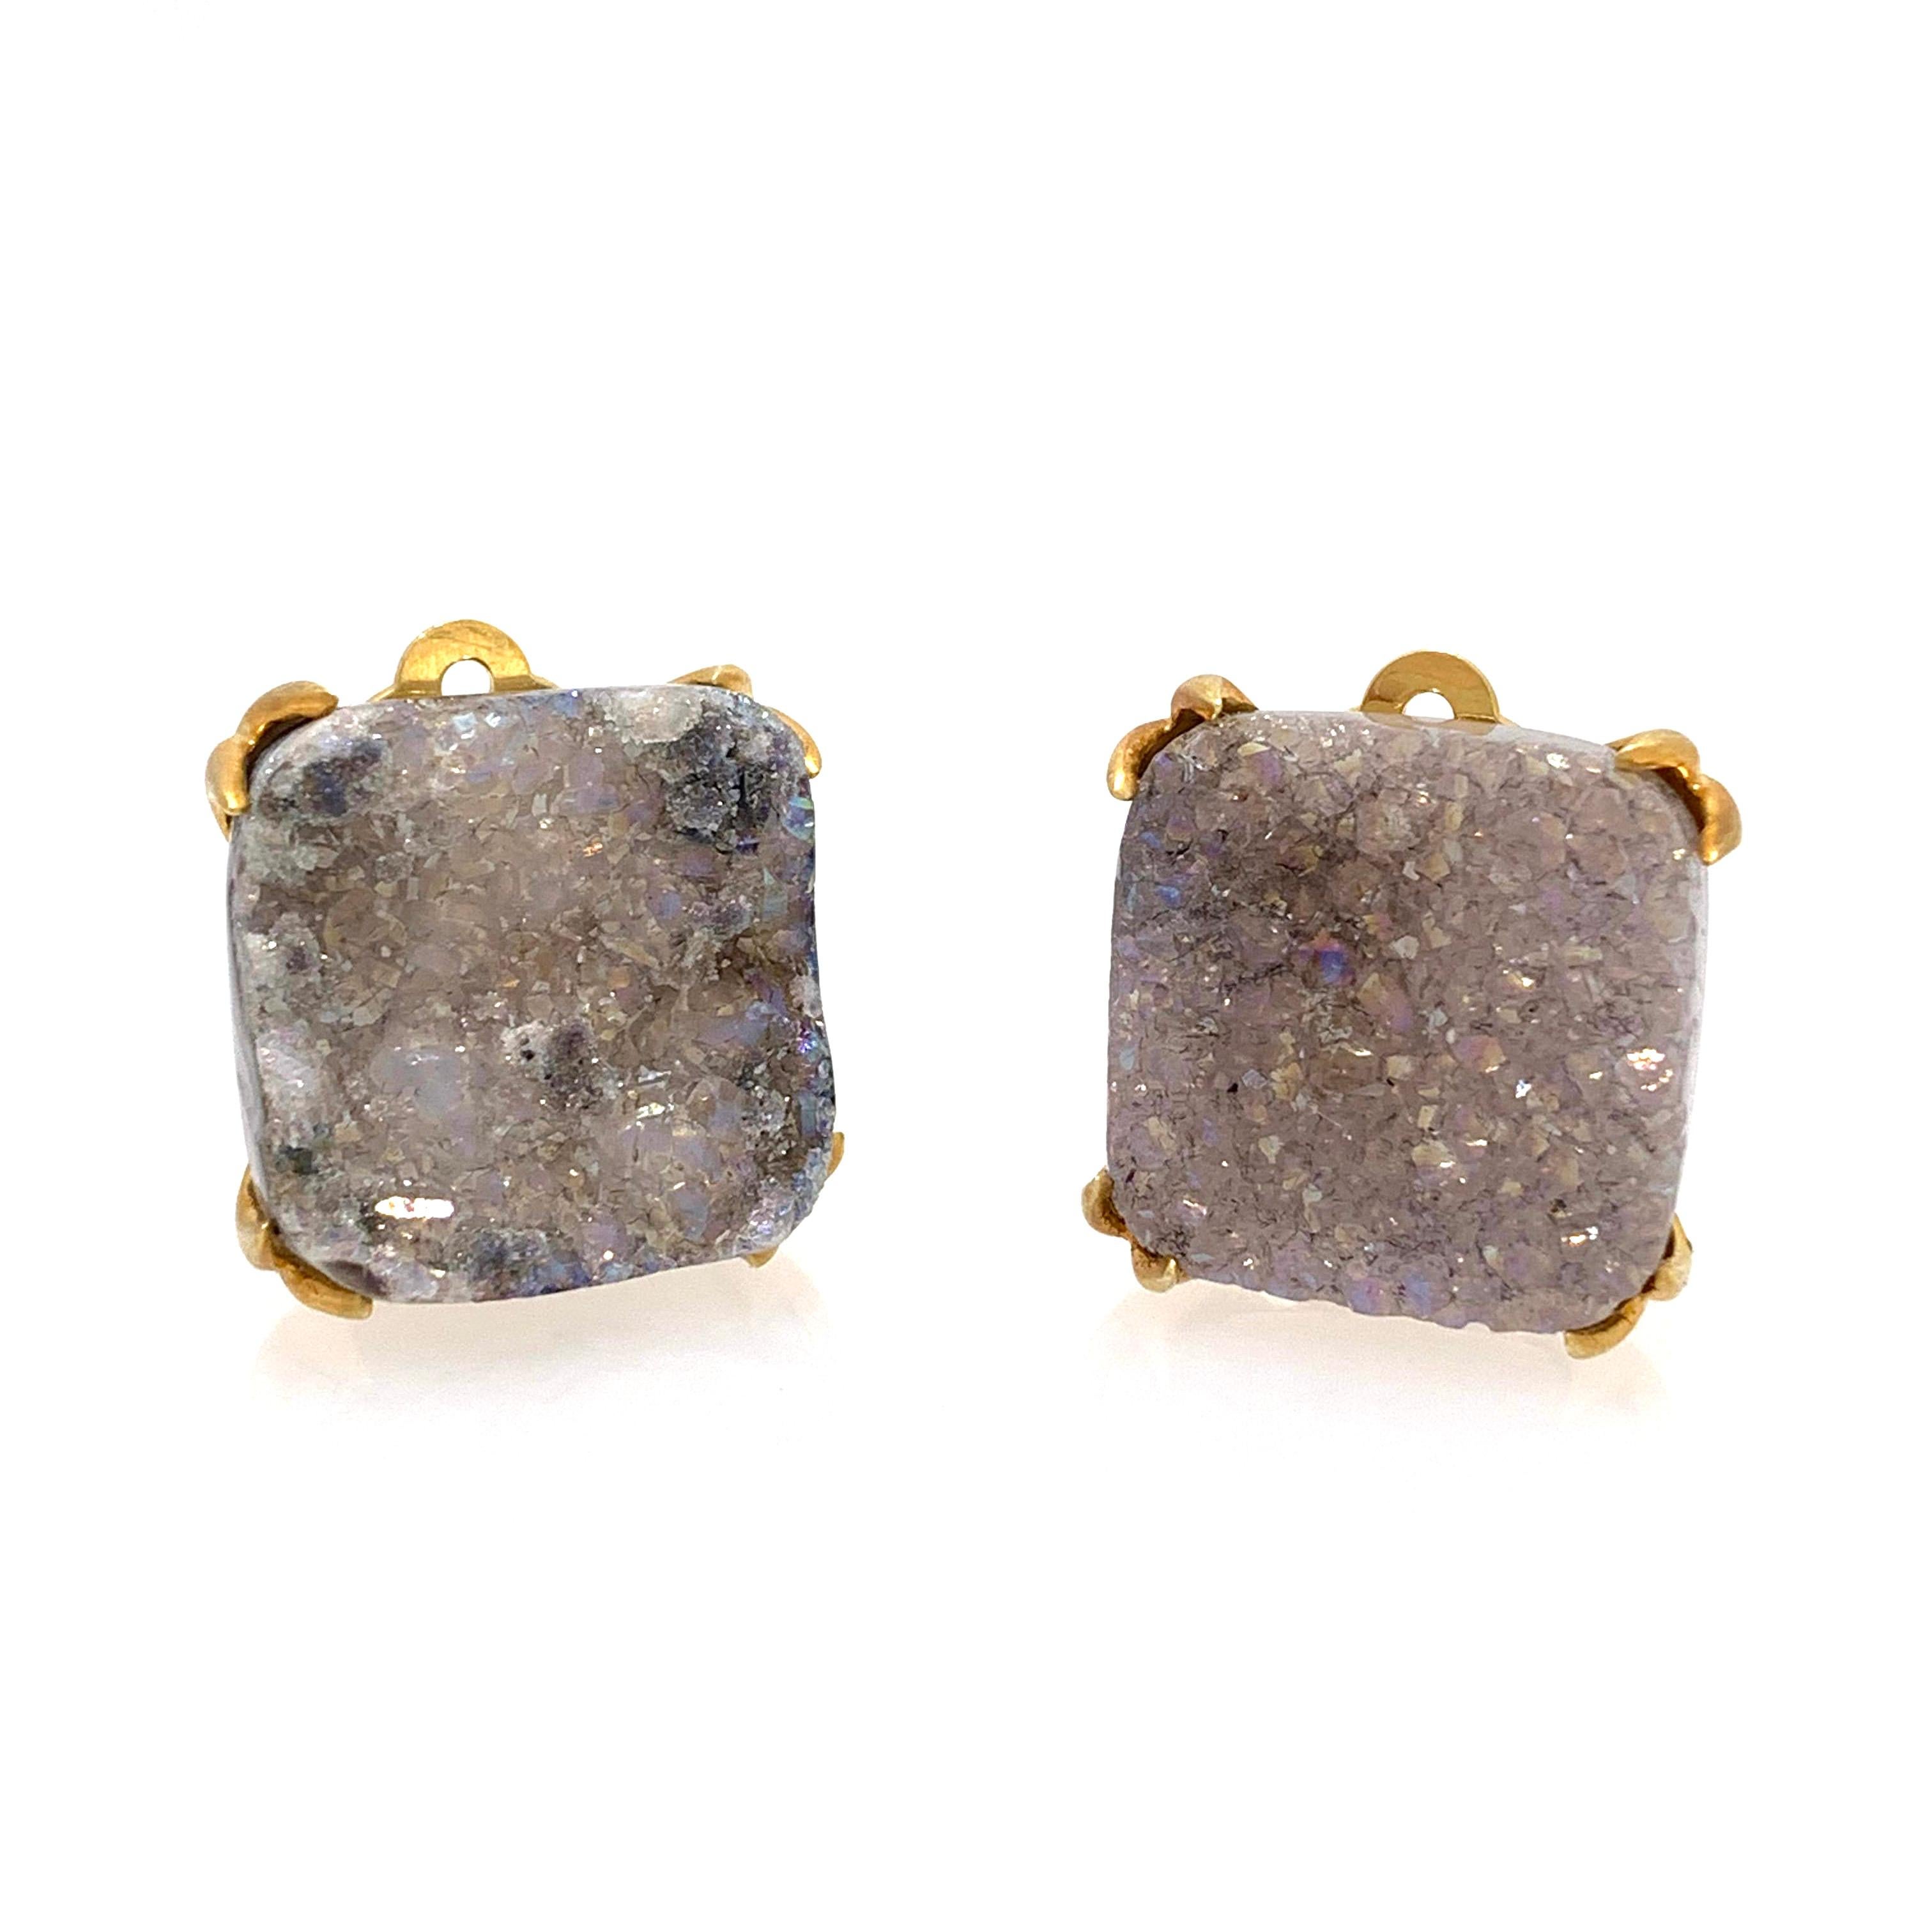 Fabulous pair of square shape druzy quartz clip on earrings. The pair measures 20mm width and height, in 18k gold vermeil over sterling silver setting (matte finish). Large and comfortable clip back allowing the earrings to sit well on the